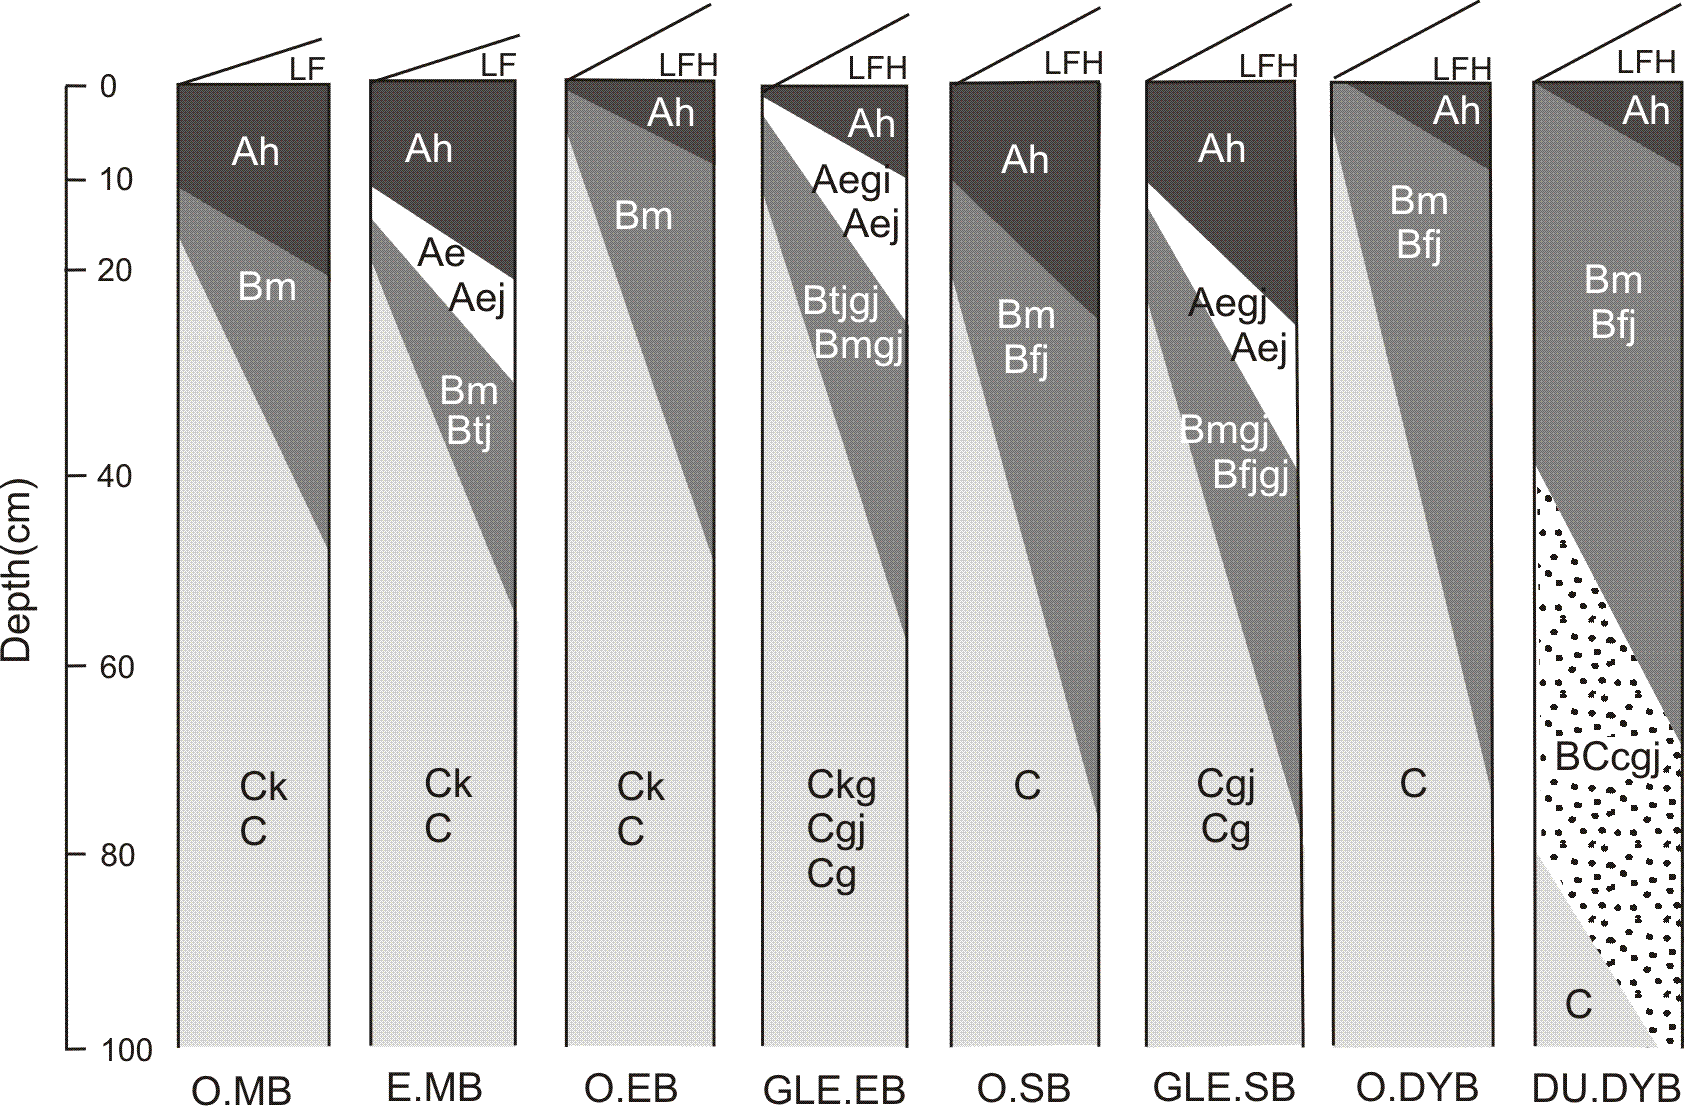 Figure 28 is a diagrammatic horizon pattern of some subgroups of the Brunisolic order.

Orthic Melanic Brunisol (O.MB)
Common horizon sequence: LF, Ah, Bm, Ck or C. These soils have the general properties specified for the Brunisolic order and the Melanic Brunisol great group. Characteristically, they have a forest mull Ah horizon with fine to medium granular structure and a brownish-colored Bm horizon with a chroma of 3 or more. The color of the B horizon normally fades with depth. Commonly the C horizon is calcareous. Orthic Melanic Brunisols are identified by the following properties:
They have either an Ah horizon 10 cm thick or more or an Ap horizon at least 10 cm thick with a moist color value less than 4. The A horizon does not meet the requirements of a chernozemic A.
1.	They have a pH (0.01 M CaCl2) of 5.5 or more as specified for the great group.
2.	They have a Bm horizon at least 5 cm thick.
3.	They lack an eluvial horizon, Ae or Aej, at least 2 cm thick.
4.	They lack mottles that indicate gleying as specified for Gleyed Melanic Brunisols.
Orthic Melanic Brunisols and all other subgroups of Brunisolic soils may have a lithic contact within 50 cm of the surface or have turbic or andic features. These features are separated taxonomically at the family (lithic, some andic) or series (turbic) levels, or as phases of any taxonomic level above the family.

Eluviated Melanic Brunisol (E.MB)
Common horizon sequence: LF, Ah, Ae or Aej, Bm or Btj, Ck or C. These soils have the general properties specified for soils of the Brunisolic order and the Melanic Brunisol great group. They differ from Orthic Melanic Brunisols by having an eluvial horizon, Ae or Aej, at least 2 cm thick. The underlying horizon may be a Btj with thin clay skins on some surfaces or, less commonly, a Bfj. Otherwise, they have the diagnostic properties of Orthic Melanic Brunisols.

Orthic Eutric Brunisol (O.EB)
Common horizon sequence: LFH, Bm, Ck or C. These soils have the general properties specified for the Brunisolic order and the Eutric Brunisol great group. Usually they have one or more organic surface horizons overlying a brownish-colored, base-saturated B horizon. The C horizon is commonly calcareous. Orthic Eutric Brunisols are identified by the following properties:
1.	They have a pH (0.01 M CaCl2) of 5.5 or more as specified for the great group.
2.	They have a Bm horizon at least 5 cm thick.
3.	They lack an eluvial horizon, Ae or Aej, at least 2 cm thick.
4.	They lack mottles that indicate gleying as specified for Gleyed Melanic Brunisols.
5.	They lack an Ah horizon at least 10 cm thick and an Ap horizon at least 10 cm thick with a moist color value of 4 or less.

Gleyed Eluviated Eutric Brunisol (GLE.EB)
Common horizon sequence: LFH, Ae or Aegj, Bmgj or Btjgj, Cgj or Cg or Ckg. These soils have the general properties specified for soils of the Brunisolic order and the Eutric Brunisol great group. They differ from Eluviated Eutric Brunisols by having mottles that indicate gleying. Gleyed Eluviated Eutric Brunisols have either an Ae or an Aej horizon at least 2 cm thick and mottles as specified for Gleyed Eutric Brunisols. 

Orthic Sombric Brunisol (O.SB)
Common horizon sequence: LFH, Ah, Bm, C. These soils have the general properties specified for the Brunisolic order and the Sombric Brunisol great group. Usually they have an organic layer at the surface, a dark grayish brown to black Ah horizon, a brown acid B horizon, and an acid C horizon. Orthic Sombric Brunisols are identified by the following properties:
1.	They have an Ah horizon at least 10 cm thick or an Ap horizon at least 10 cm thick with a moist color value less than 4.
2.	They have a pH (0.01 M CaCl2) of less than 5.5 as specified for the great group.
3.	They have a Bm horizon at least 5 cm thick.
4.	They lack an eluvial horizon, Ae or Aej, at least 2 cm thick.
5.	They lack mottles that indicate gleying as specified for Gleyed Sombric Brunisols.
6.	They lack a duric horizon.

Gleyed Eluviated Sombric Brunisol (GLE.SB)
Common horizon sequence: LFH, Ah, Aej or Aegj, Bmgj or Bfjgj, Cgj or Cg. These soils have the general properties specified for soils of the Brunisolic order and the Sombric Brunisol great group. They differ from Eluviated Sombric Brunisols by having mottles that indicate gleying. Gleyed Eluviated Sombric Brunisols have either an Ae or an Aej horizon at least 2 cm thick and mottles as specified for Gleyed Sombric Brunisols.

Orthic Dystric Brunisol (O.DYB)
Common horizon sequence: LFH, Bm, C. These soils have the general properties specified for the Brunisolic order and the Dystric Brunisol great group. Usually they have organic surface horizons and brownish-colored, acid B horizons overlying acid C horizons. Orthic Dystric Brunisols are identified by the following properties:
1.	They have a pH (0.01 M CaCl2) of less than 5.5 as specified for the great group.
2.	They have a Bm horizon at least 5 cm thick.
3.	They lack an eluvial horizon, Ae or Aej, at least 2 cm thick.
4.	They lack mottles that indicate gleying as specified for Gleyed Dystric Brunisols.
5.	They lack a duric horizon.
6.	They lack an Ah horizon at least 10 cm thick and an Ap horizon at least 10 cm thick with a moist color value of 4 or less.

Duric Dystric Brunisol (DU.DYB)
Common horizon sequence: LFH, Bm or Bfj, Bc or BCc, C. These soils have the general properties specified for soils of the Brunisolic order and the Dystric Brunisol great group. They differ from Orthic Dystric Brunisols by having a duric horizon within the control section. Also they may have Ae and Btj or Bfj horizons and mottles that indicate gleying.
.